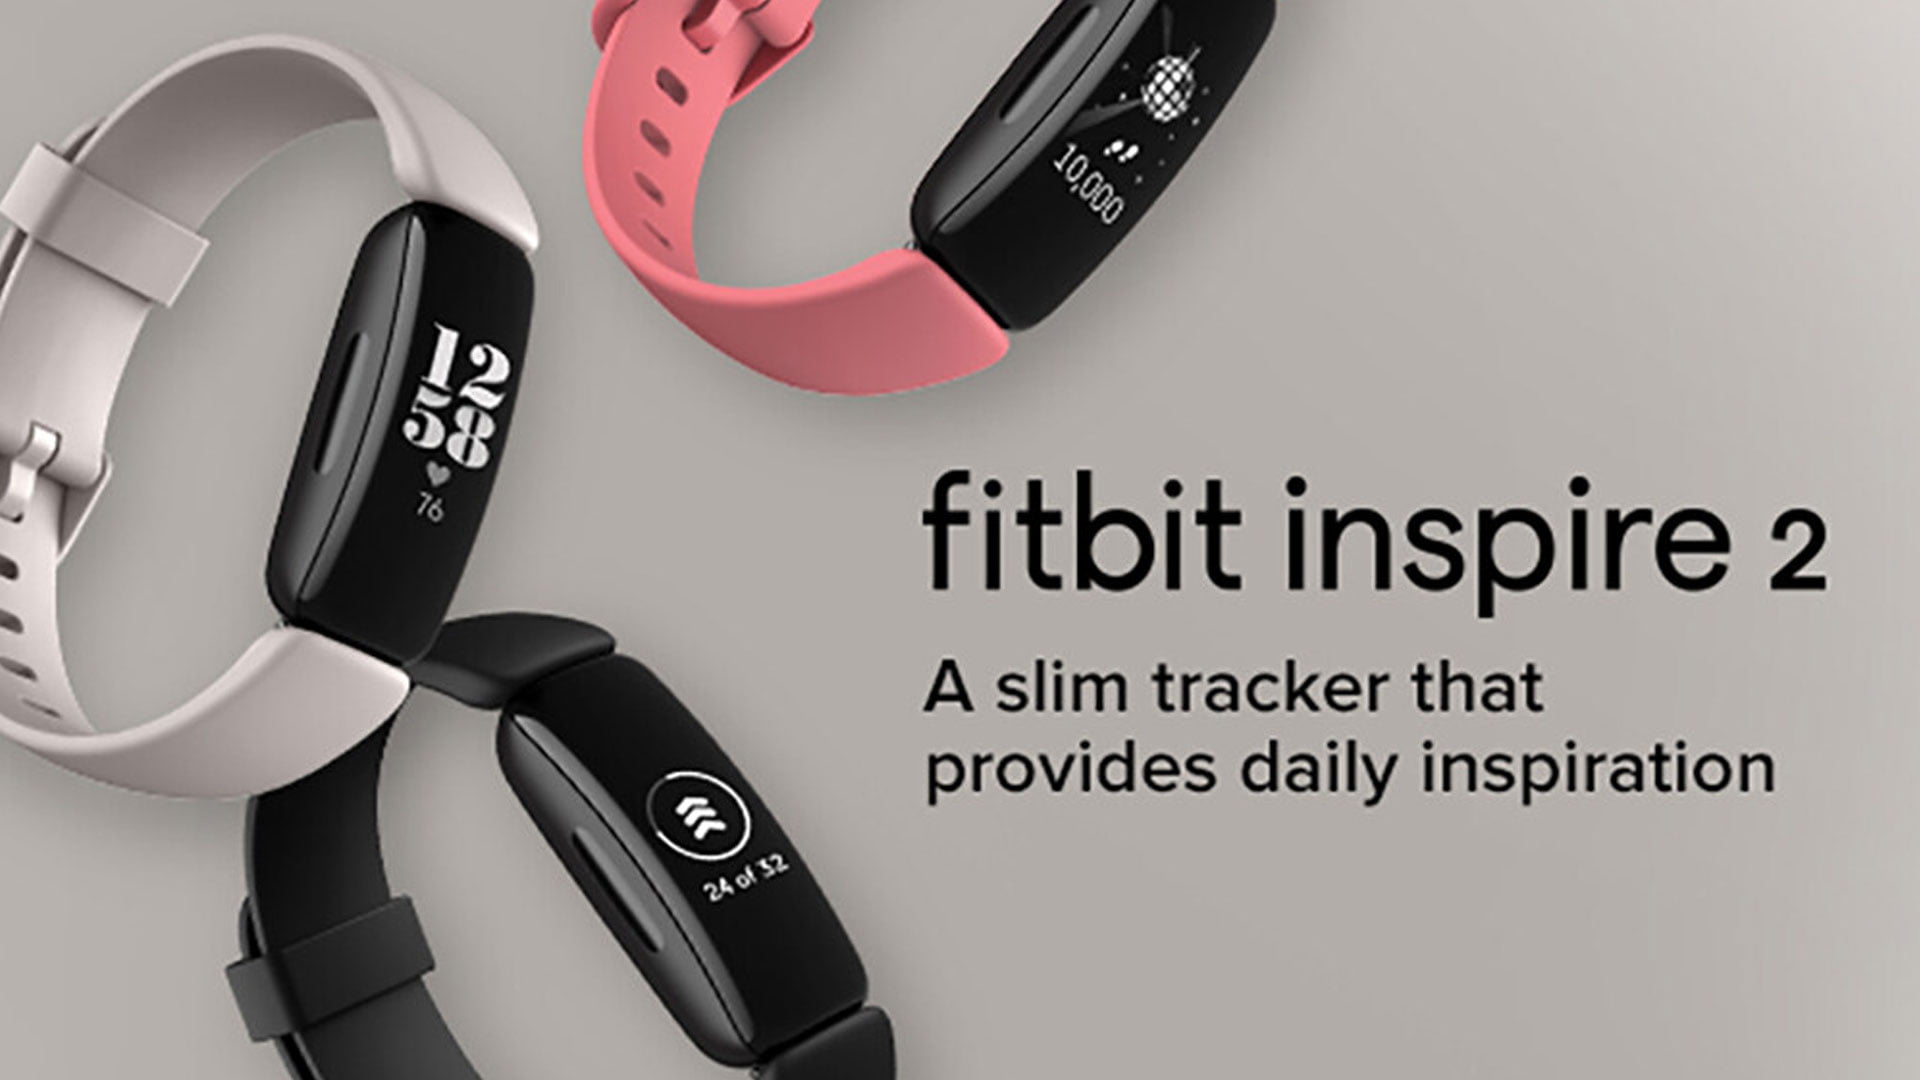 Fitbit Inspire 2 Health and Fitness Tracker Review